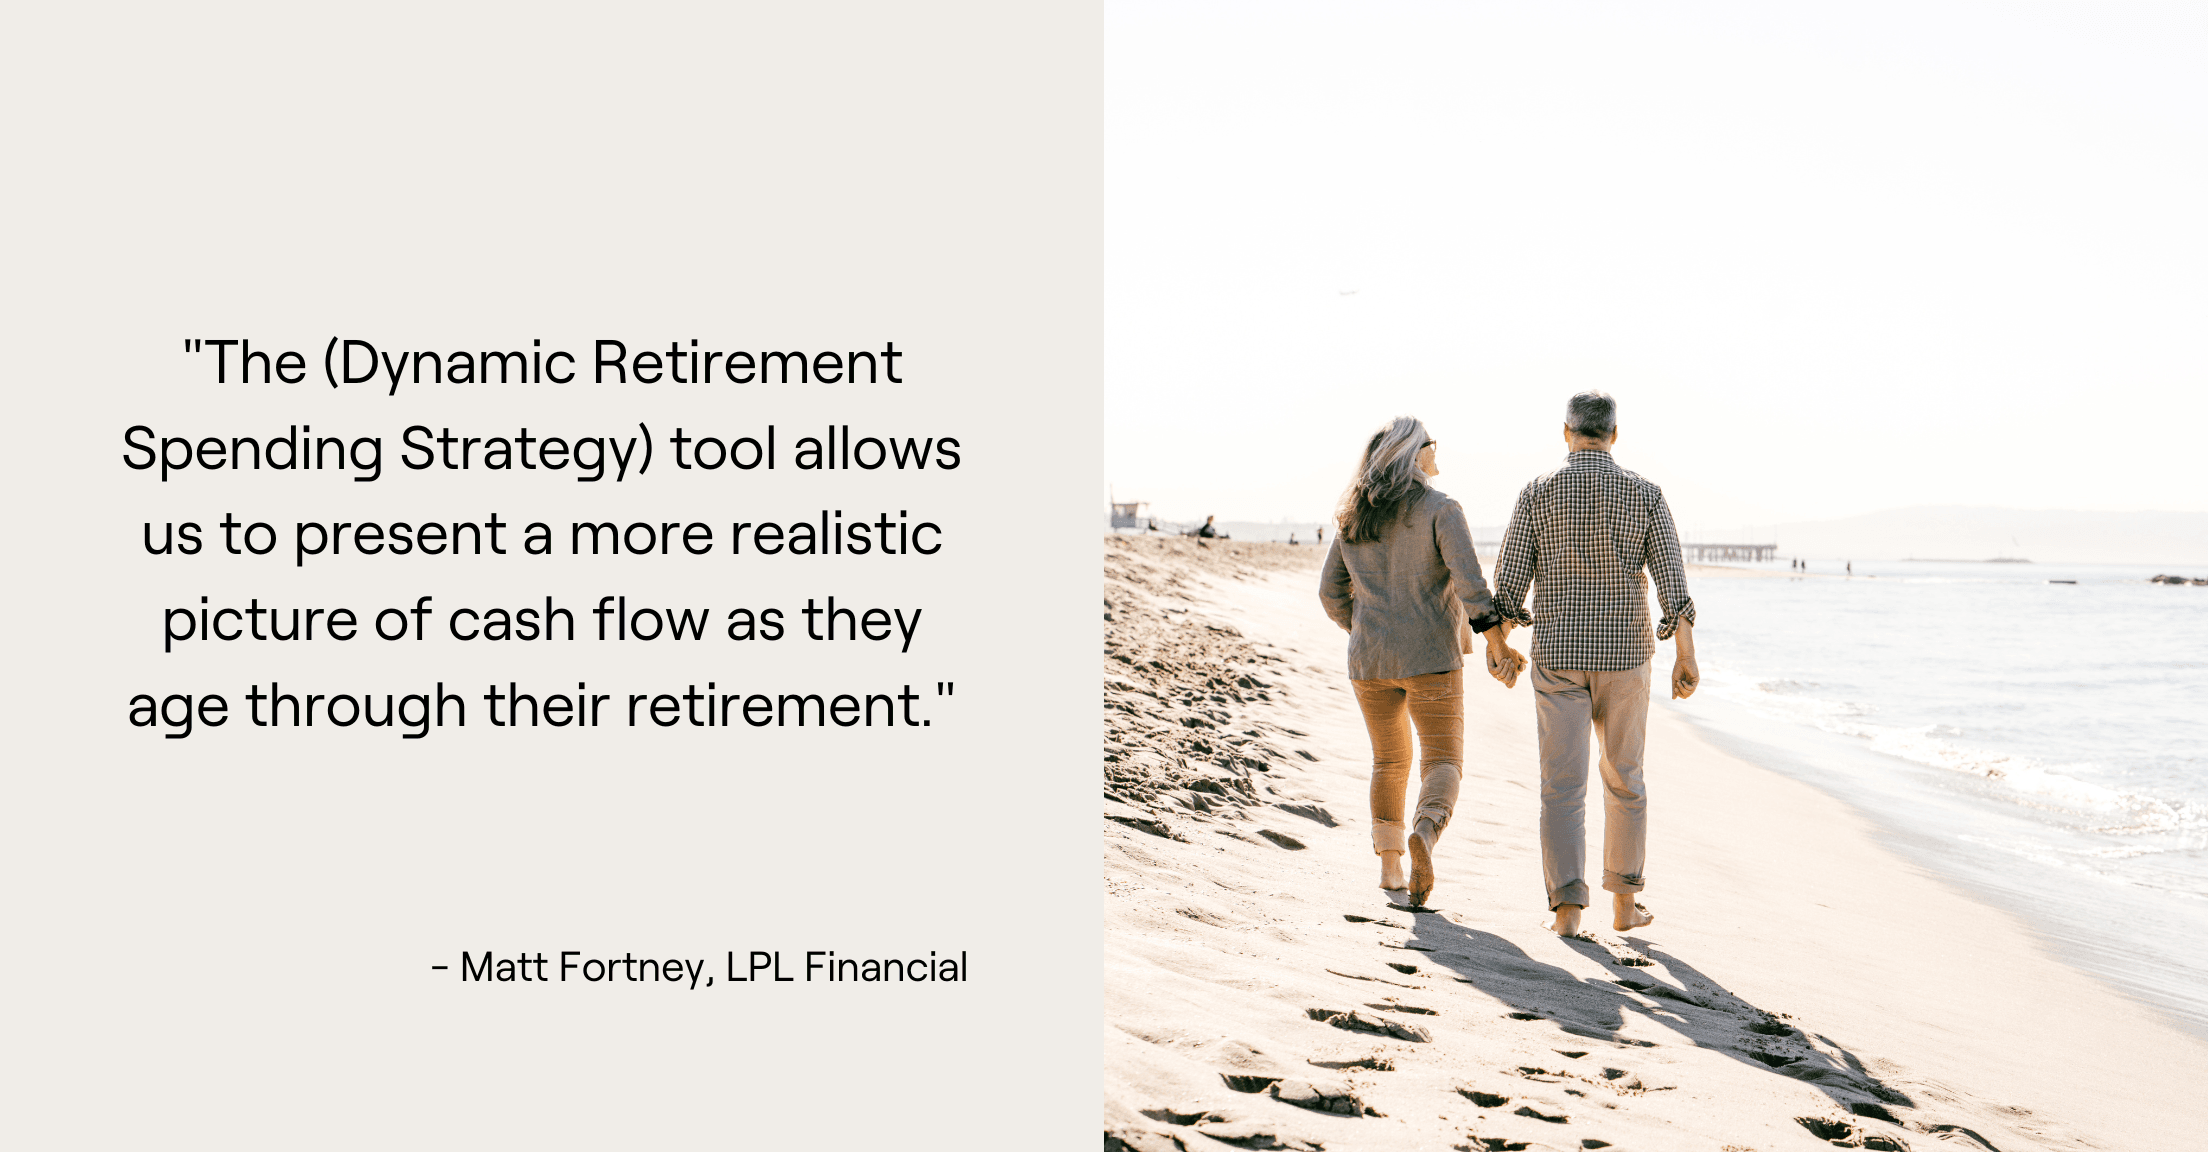 Couple walking on a beach with quote, "The (Dynamic Retirement Spending Strategy) tool allows us to present a more realistic picture of cash flow as they age through their retirement."